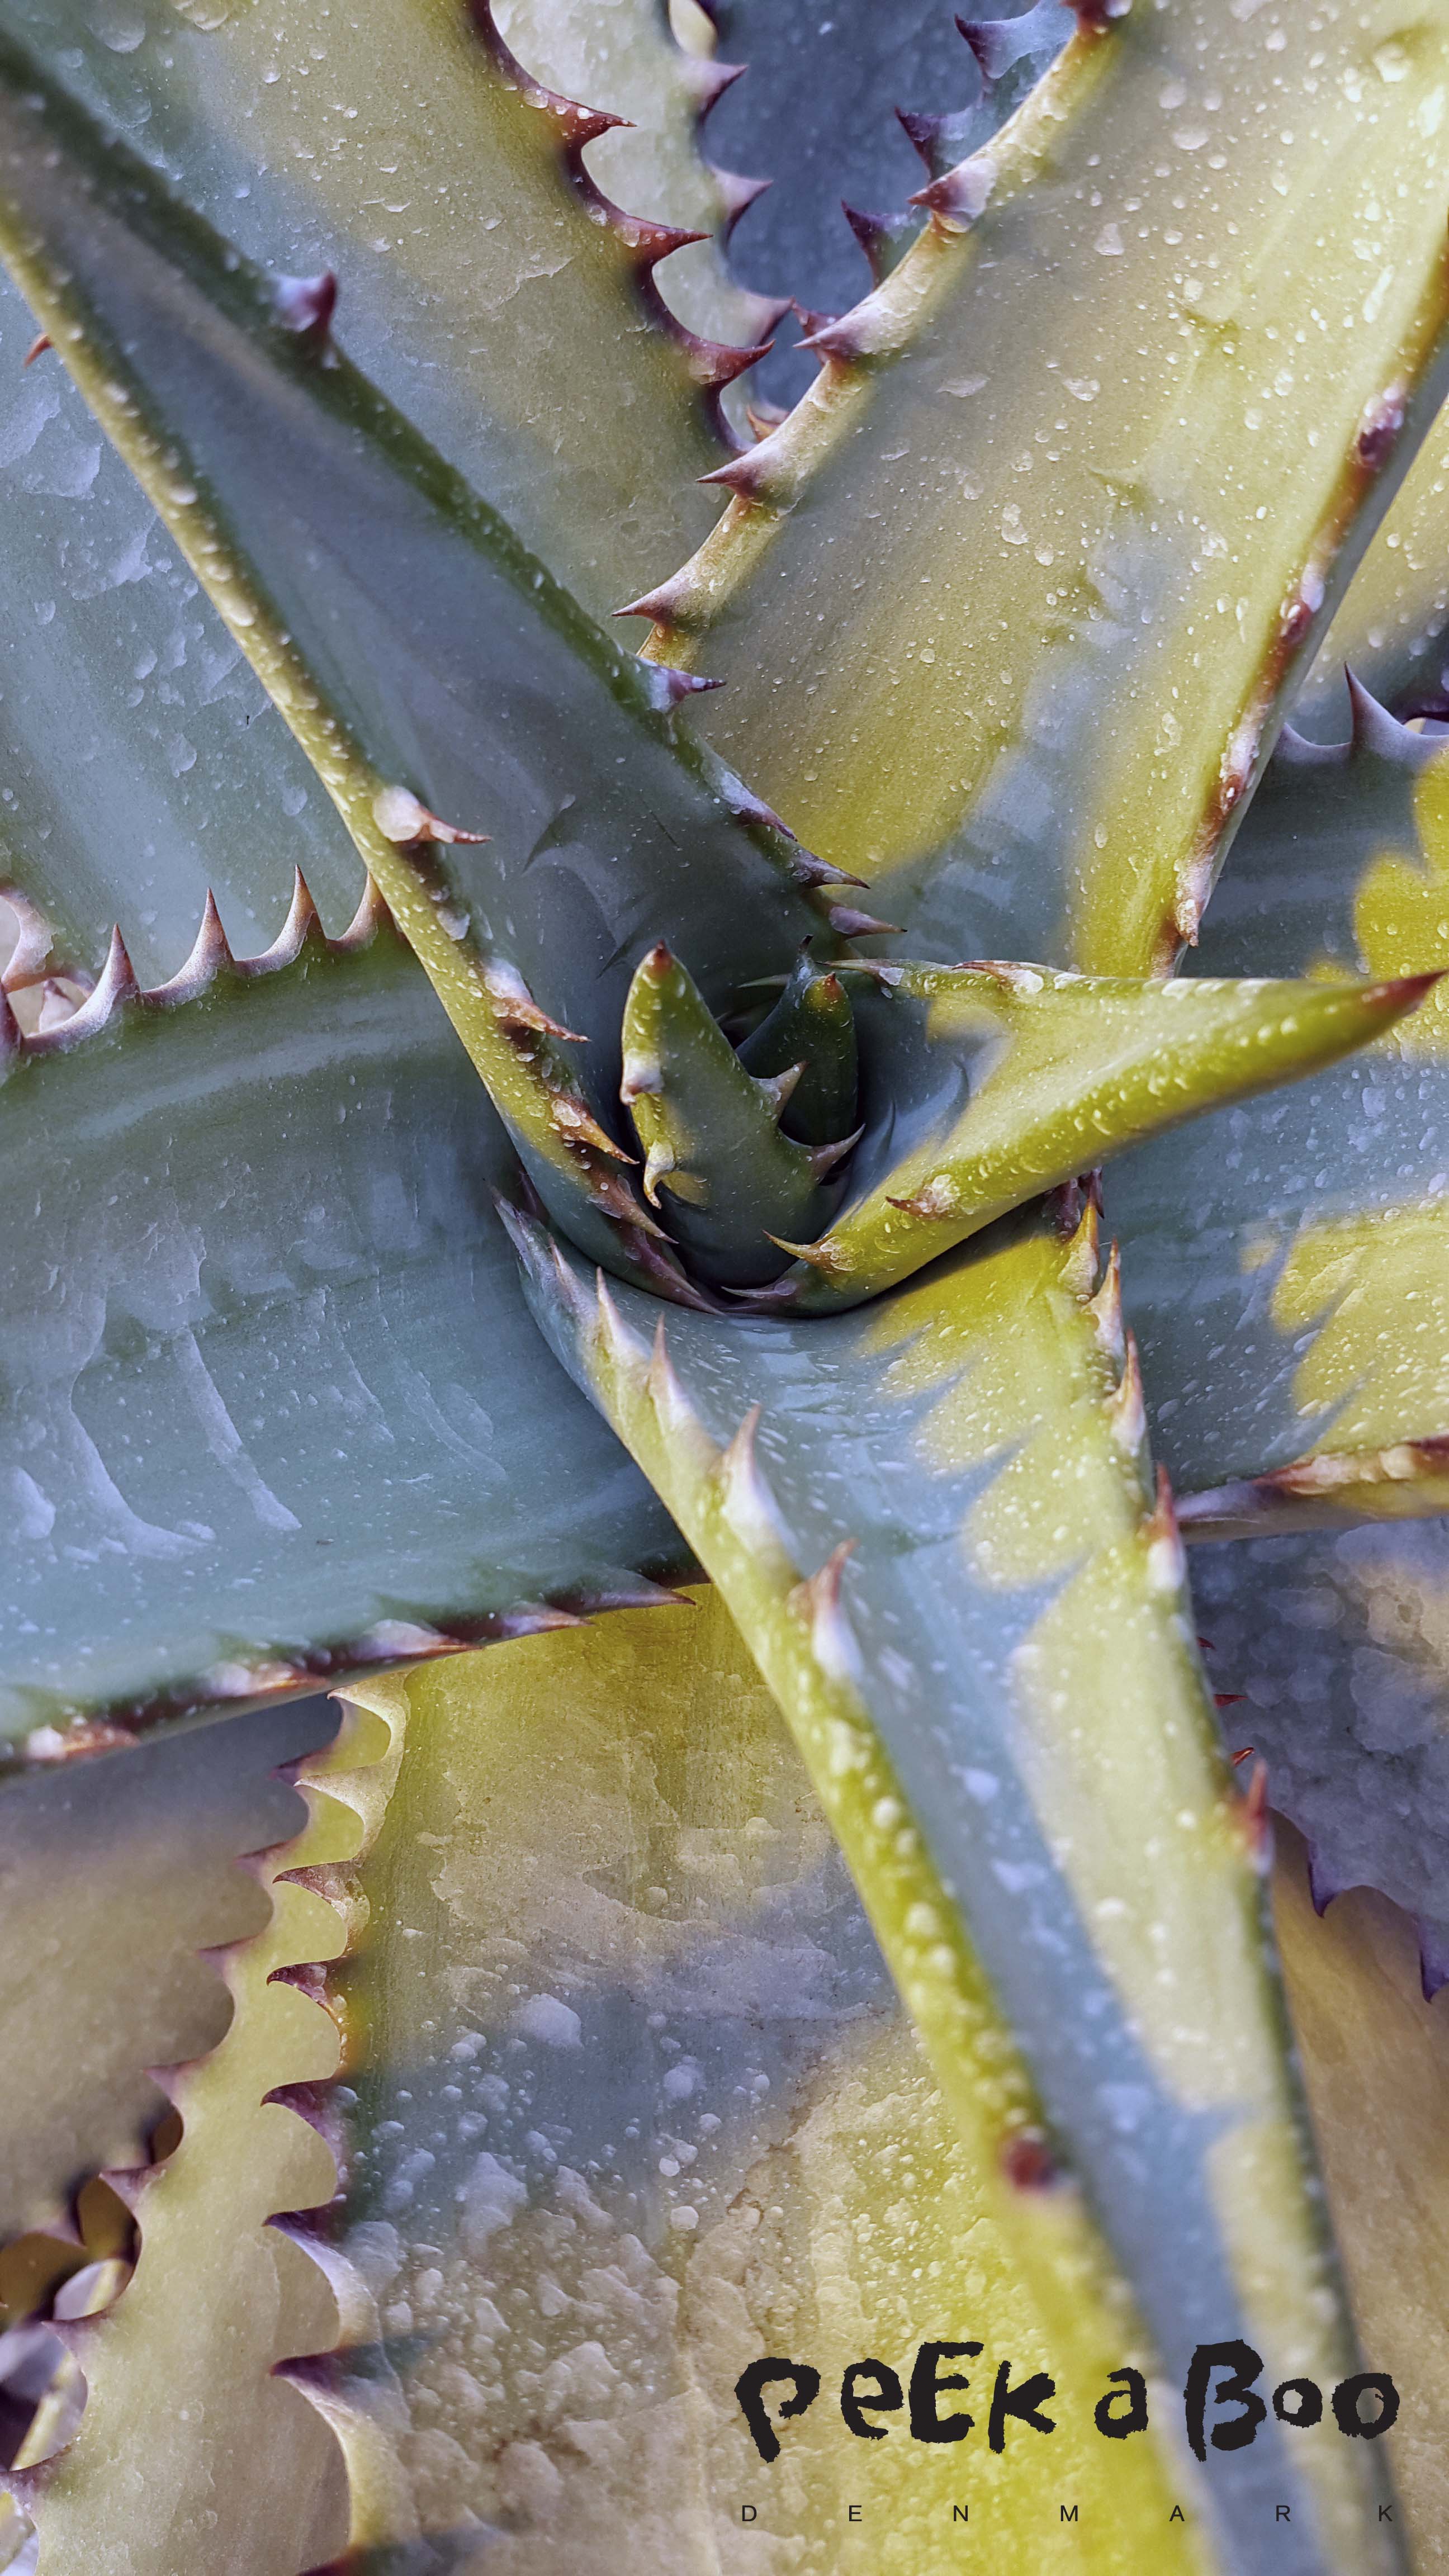 Agave is one of my favorite plants